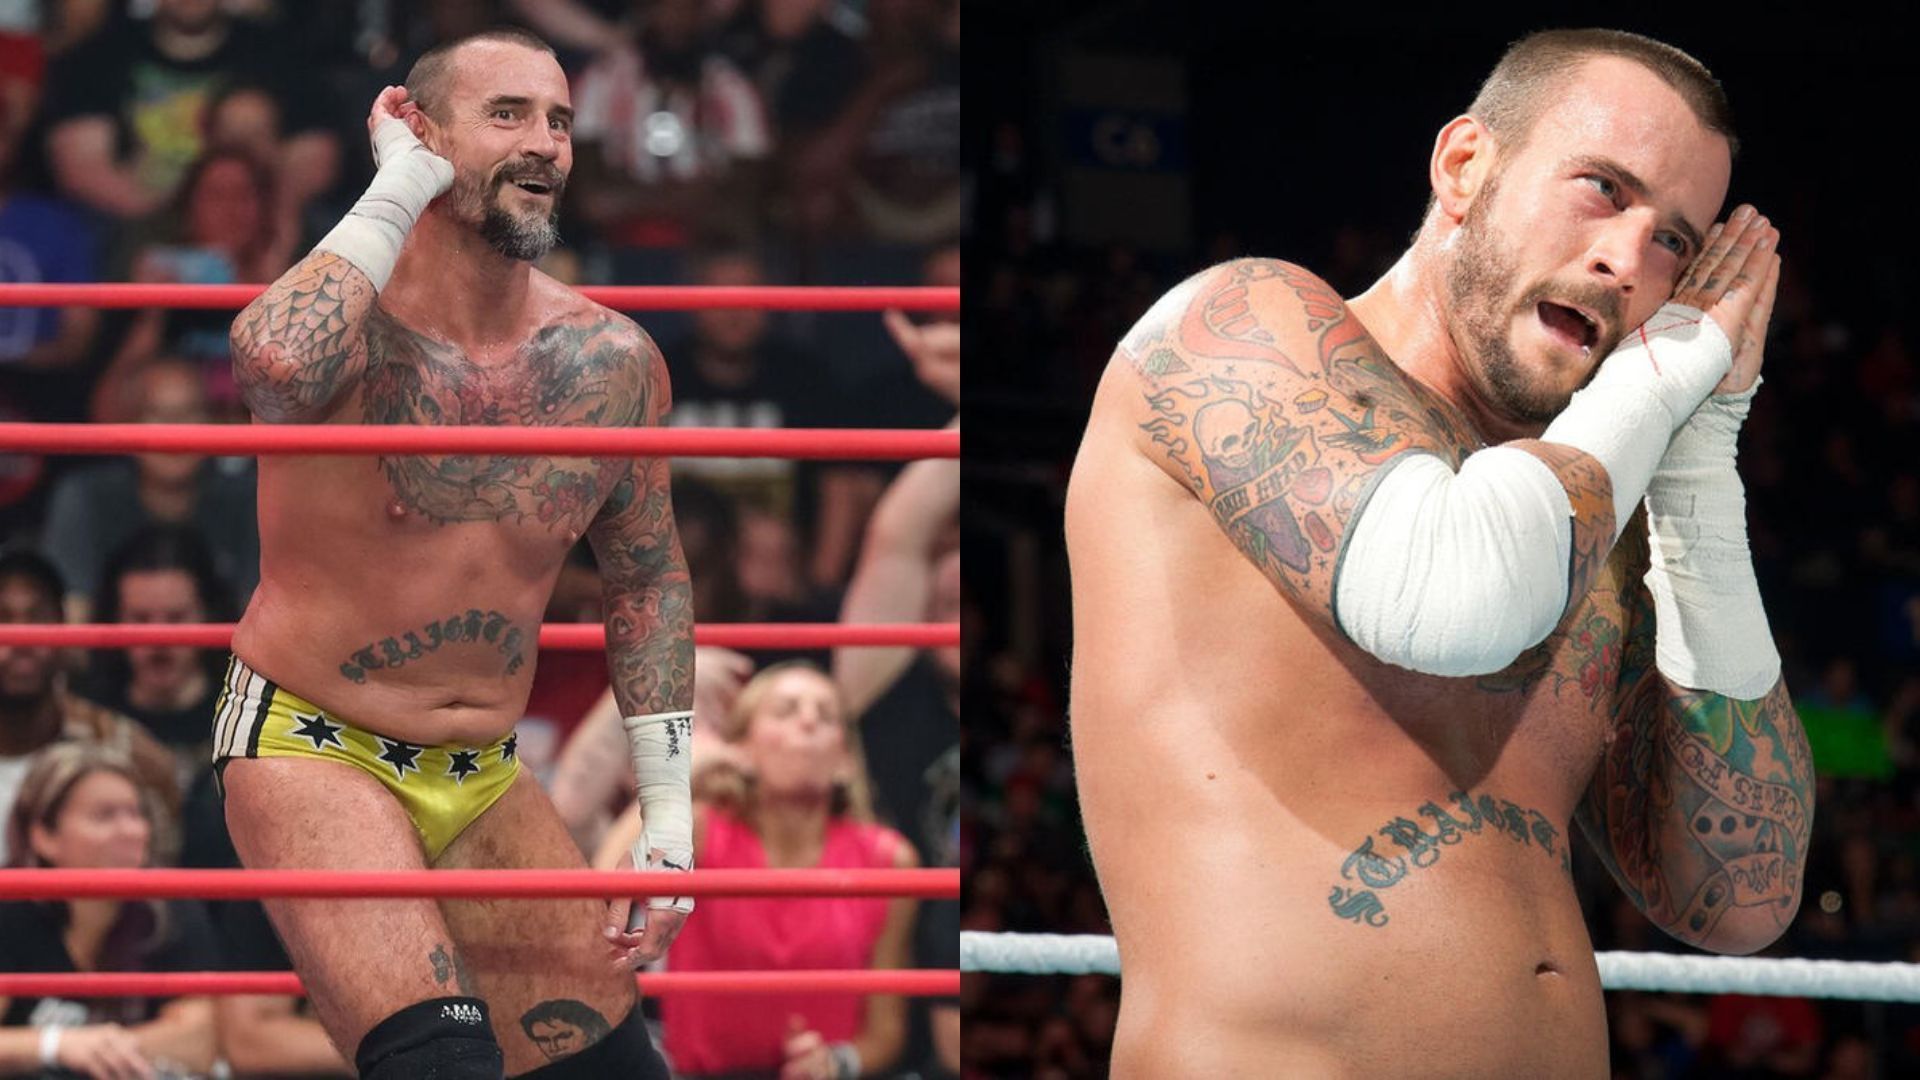 CM Punk was last seen in a wrestling ring at AEW All In